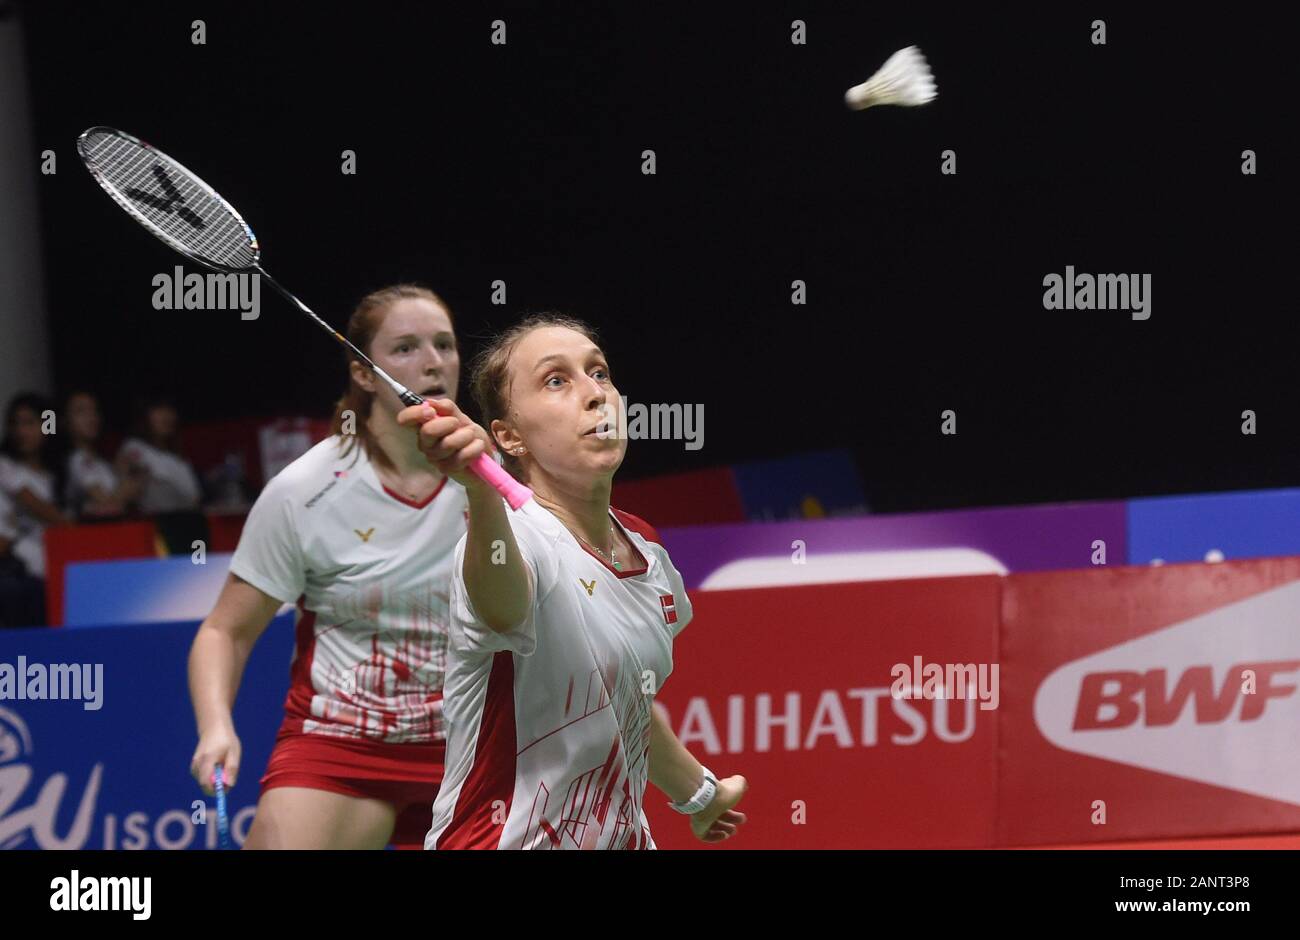 Jakarta, Indonesia. 19th Jan, 2020. Maiken Fruergaard/Sara Thygesen (Front)  of Denmark compete during the women's doubles final match against Greysia  Polii/Apriyani Rahayu of Indonesia at Indonesia Masters 2020 badminton  tournament in Jakarta,